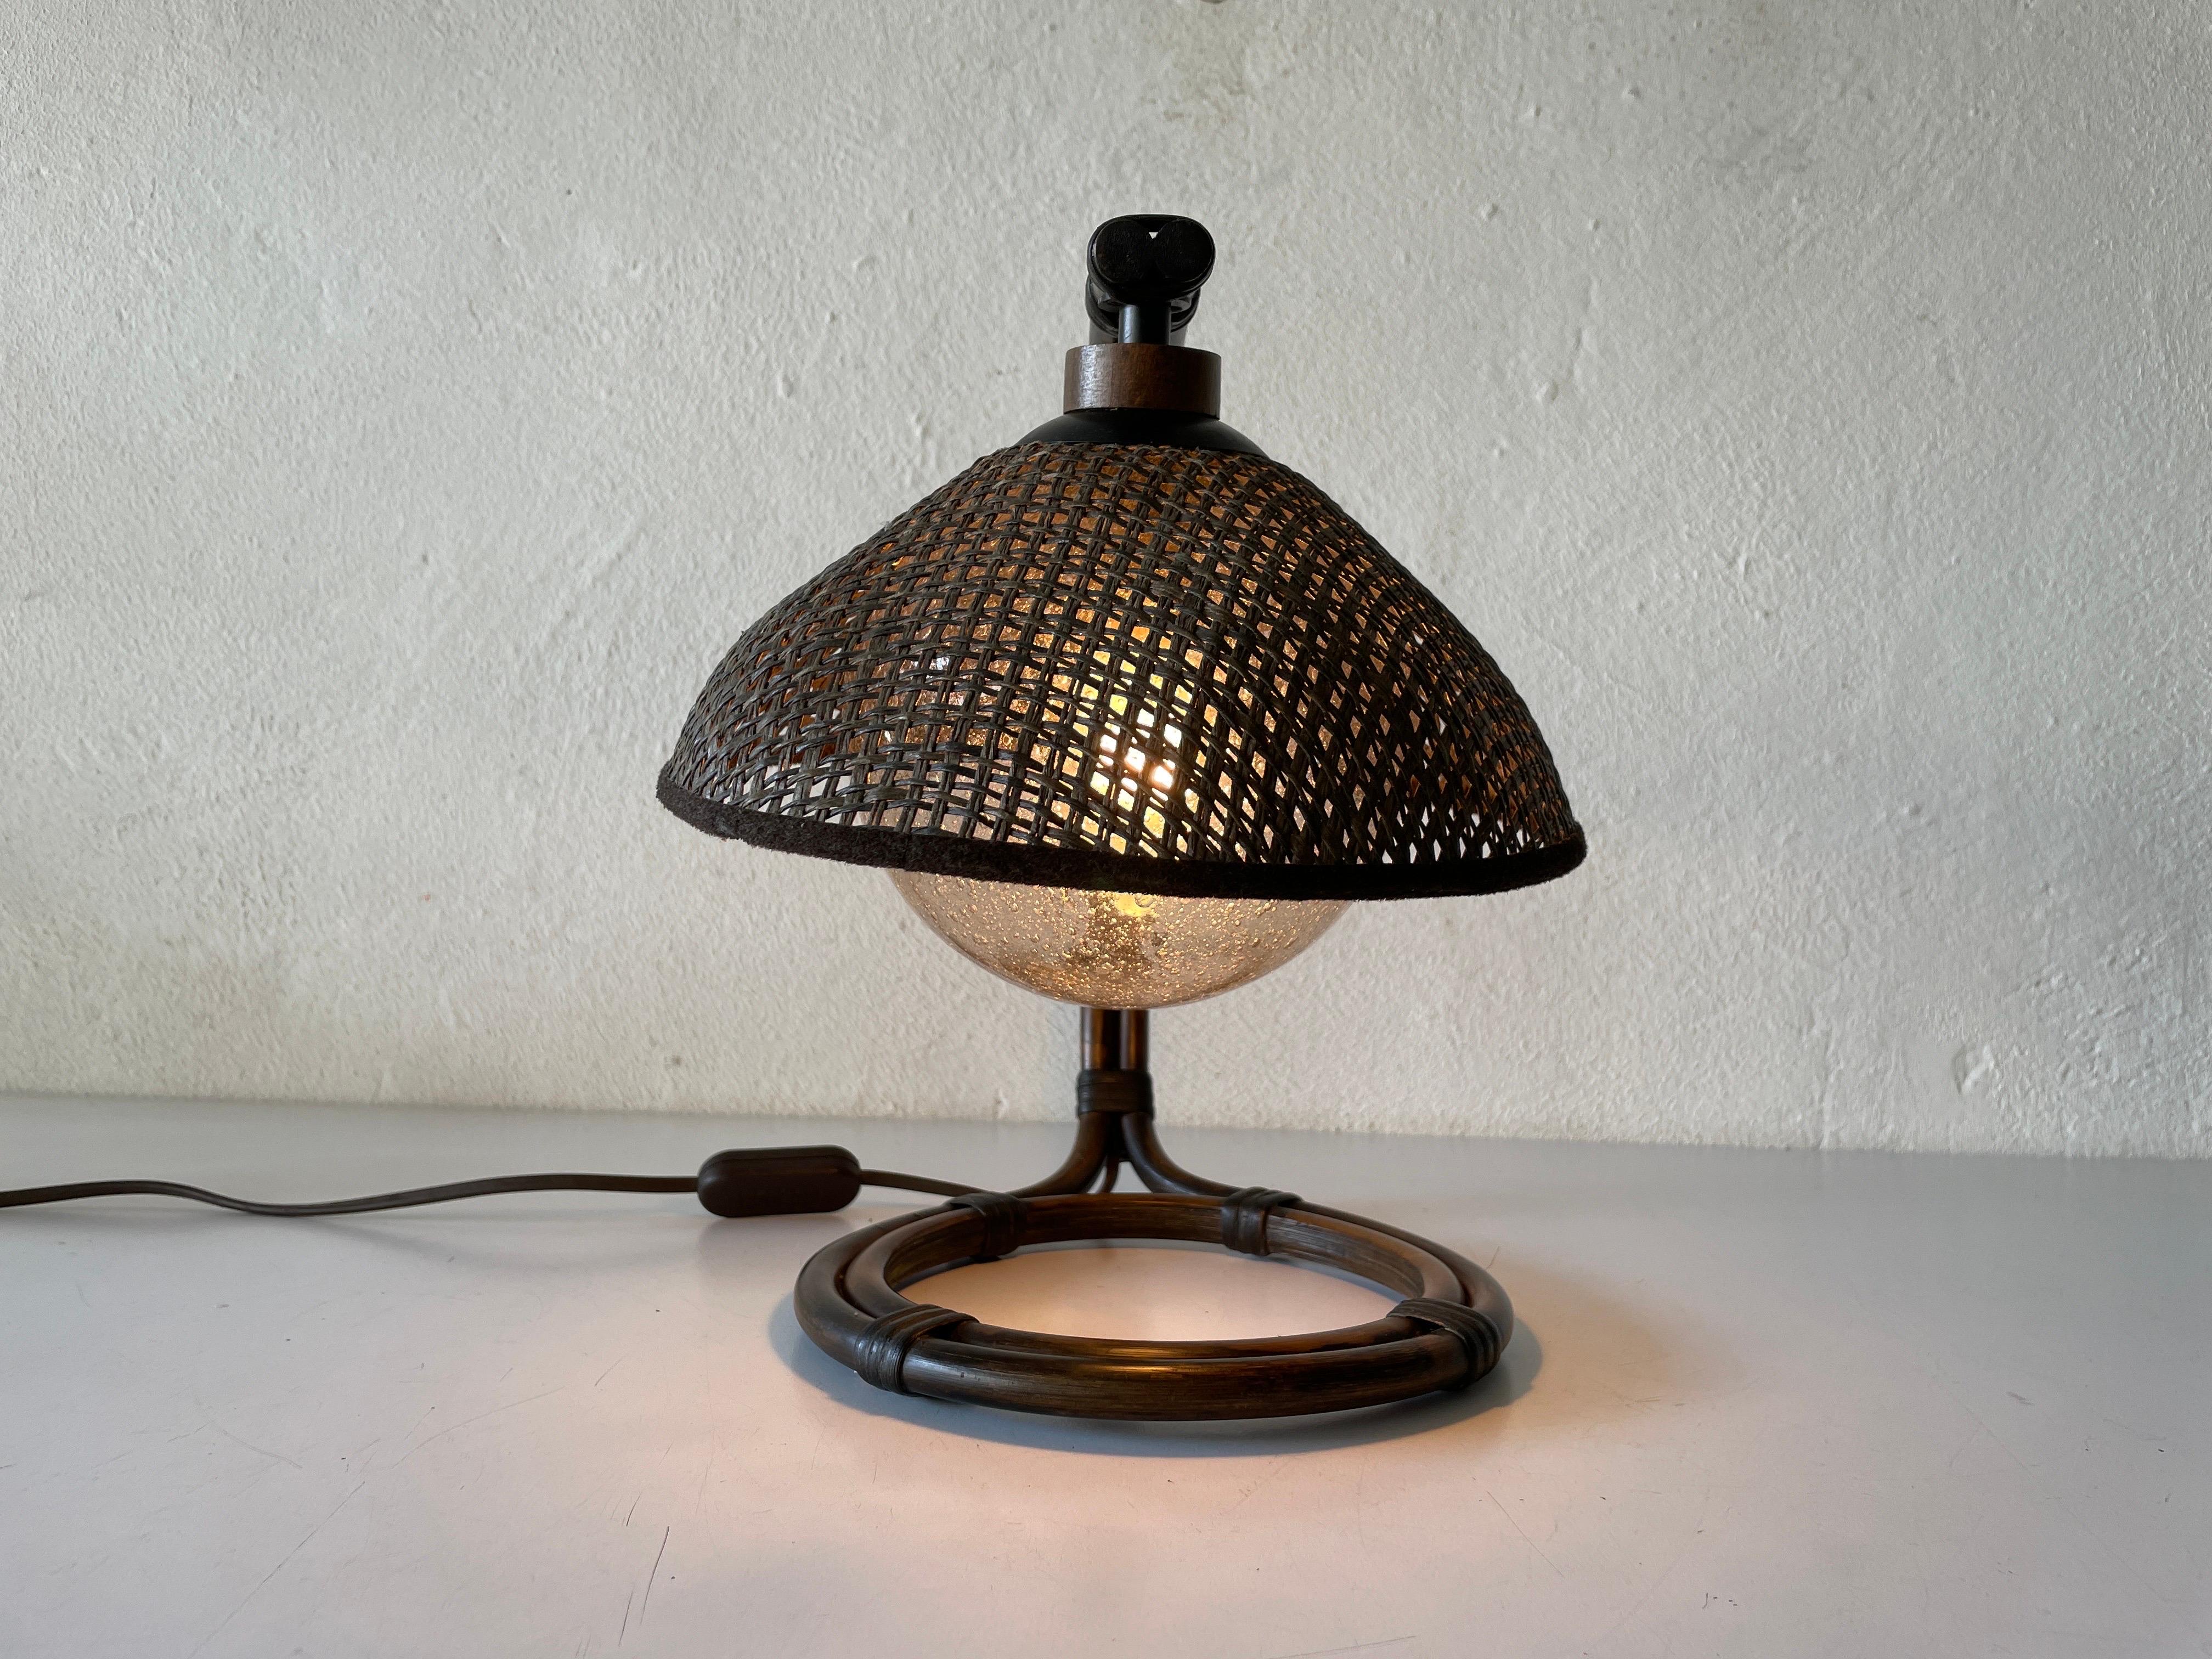 Rare Bamboo & Wicker Bedside Lamp Air Bubble Glass by Temde, 1960s, Switzerland For Sale 3